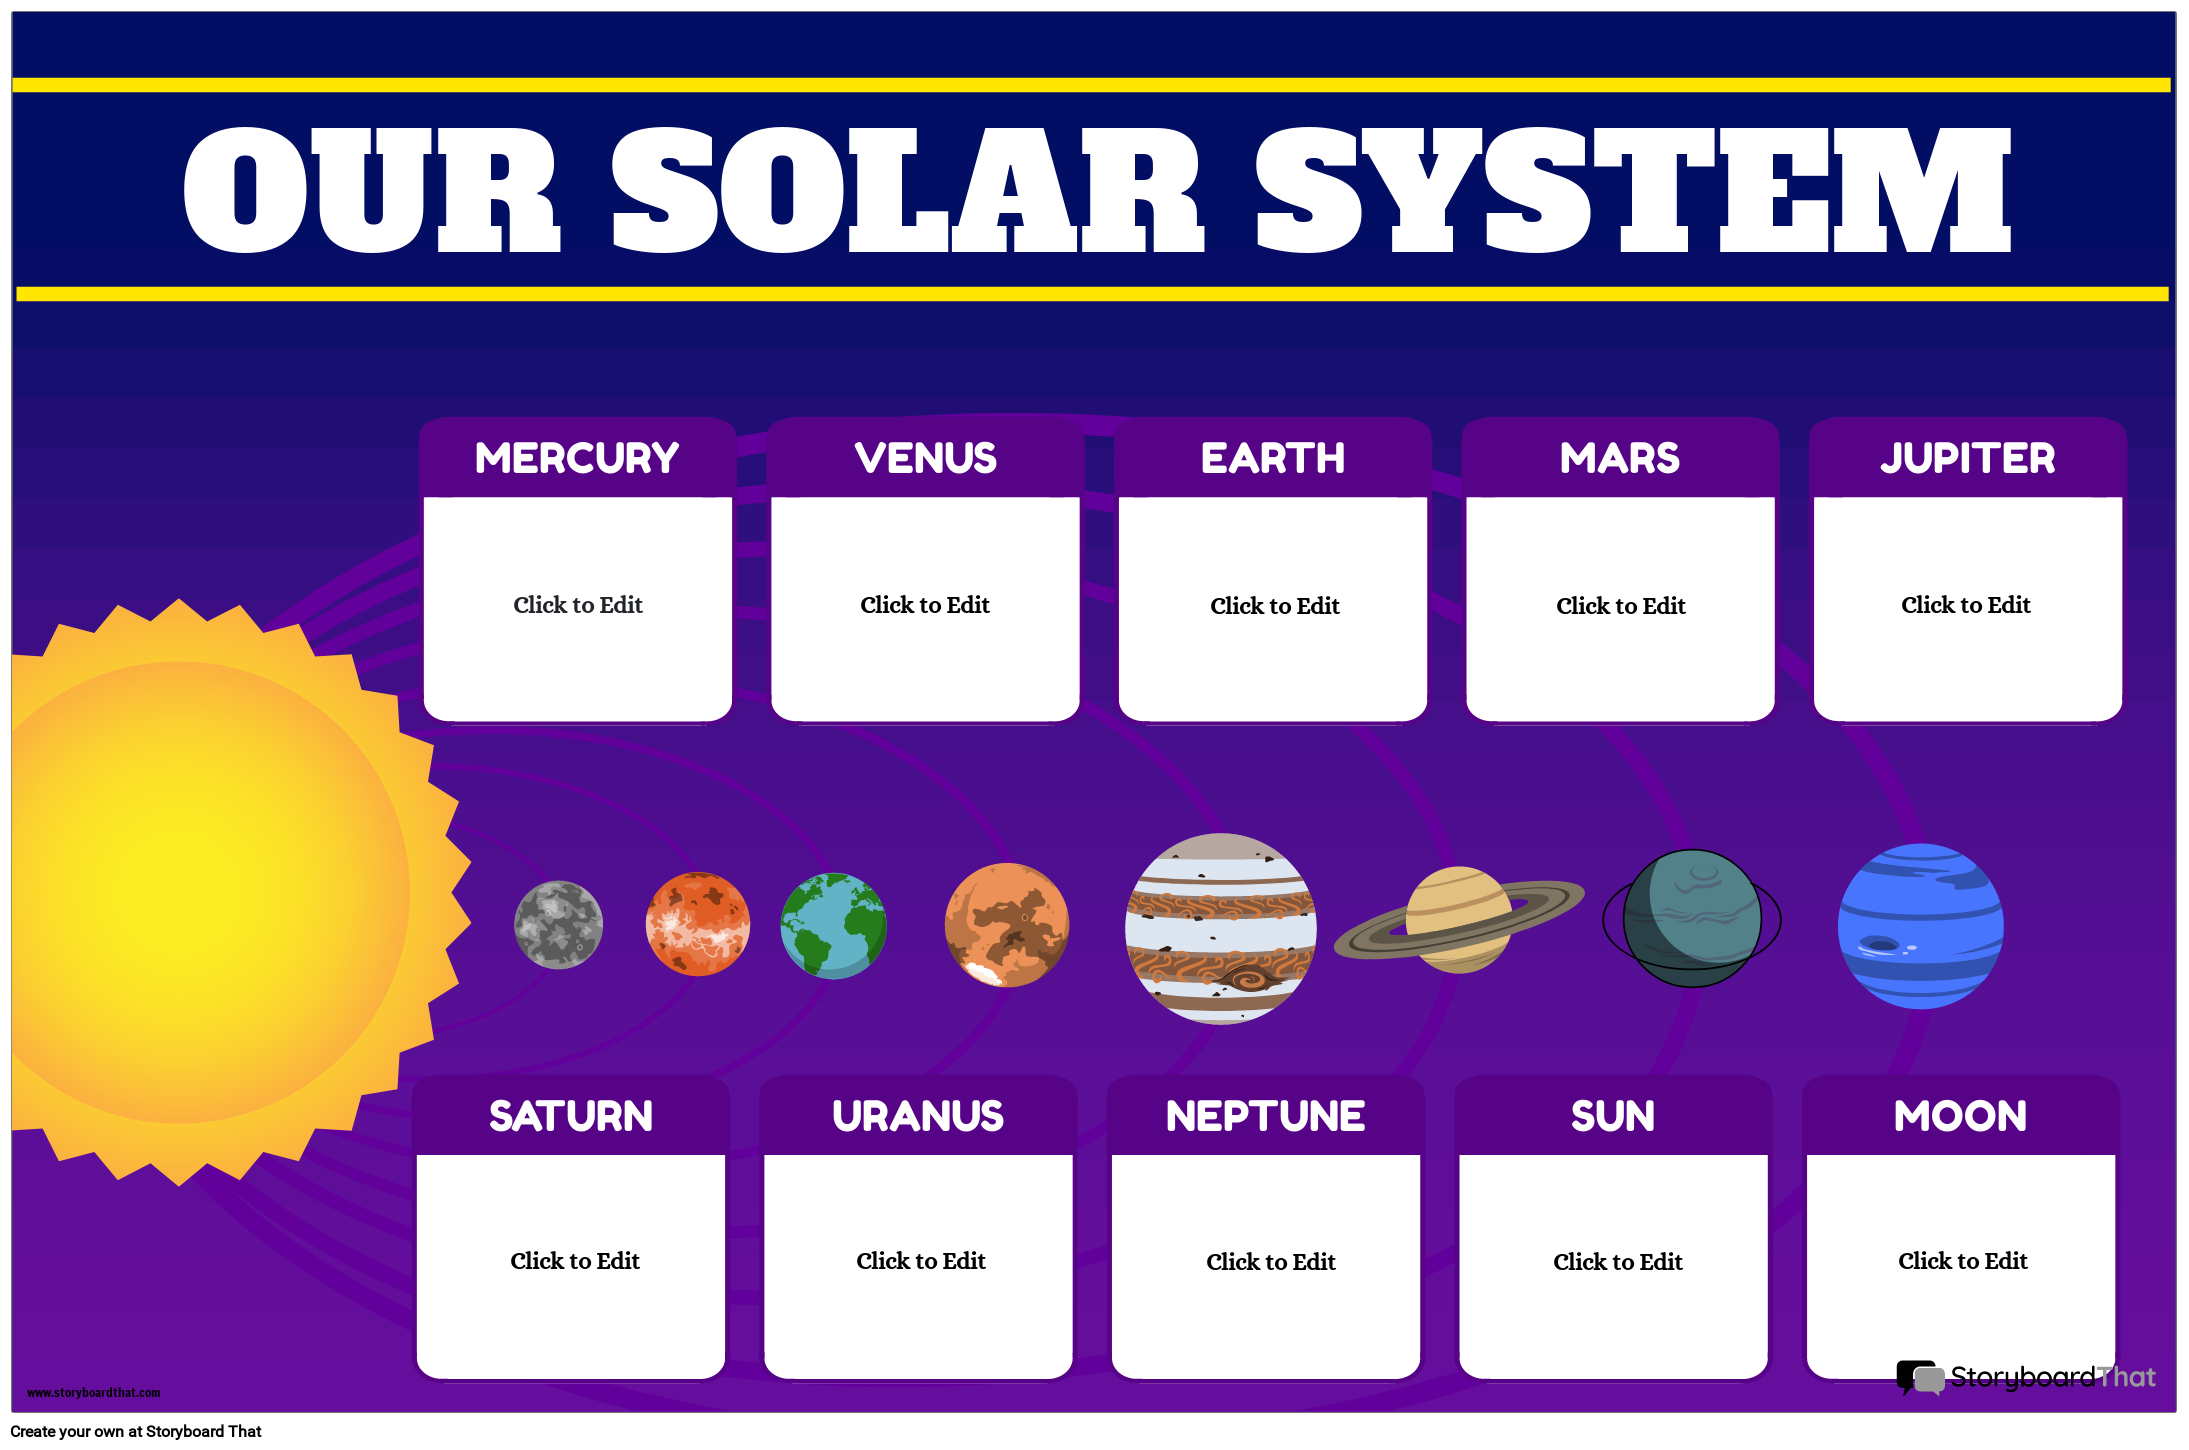 Our Solar System Infographic